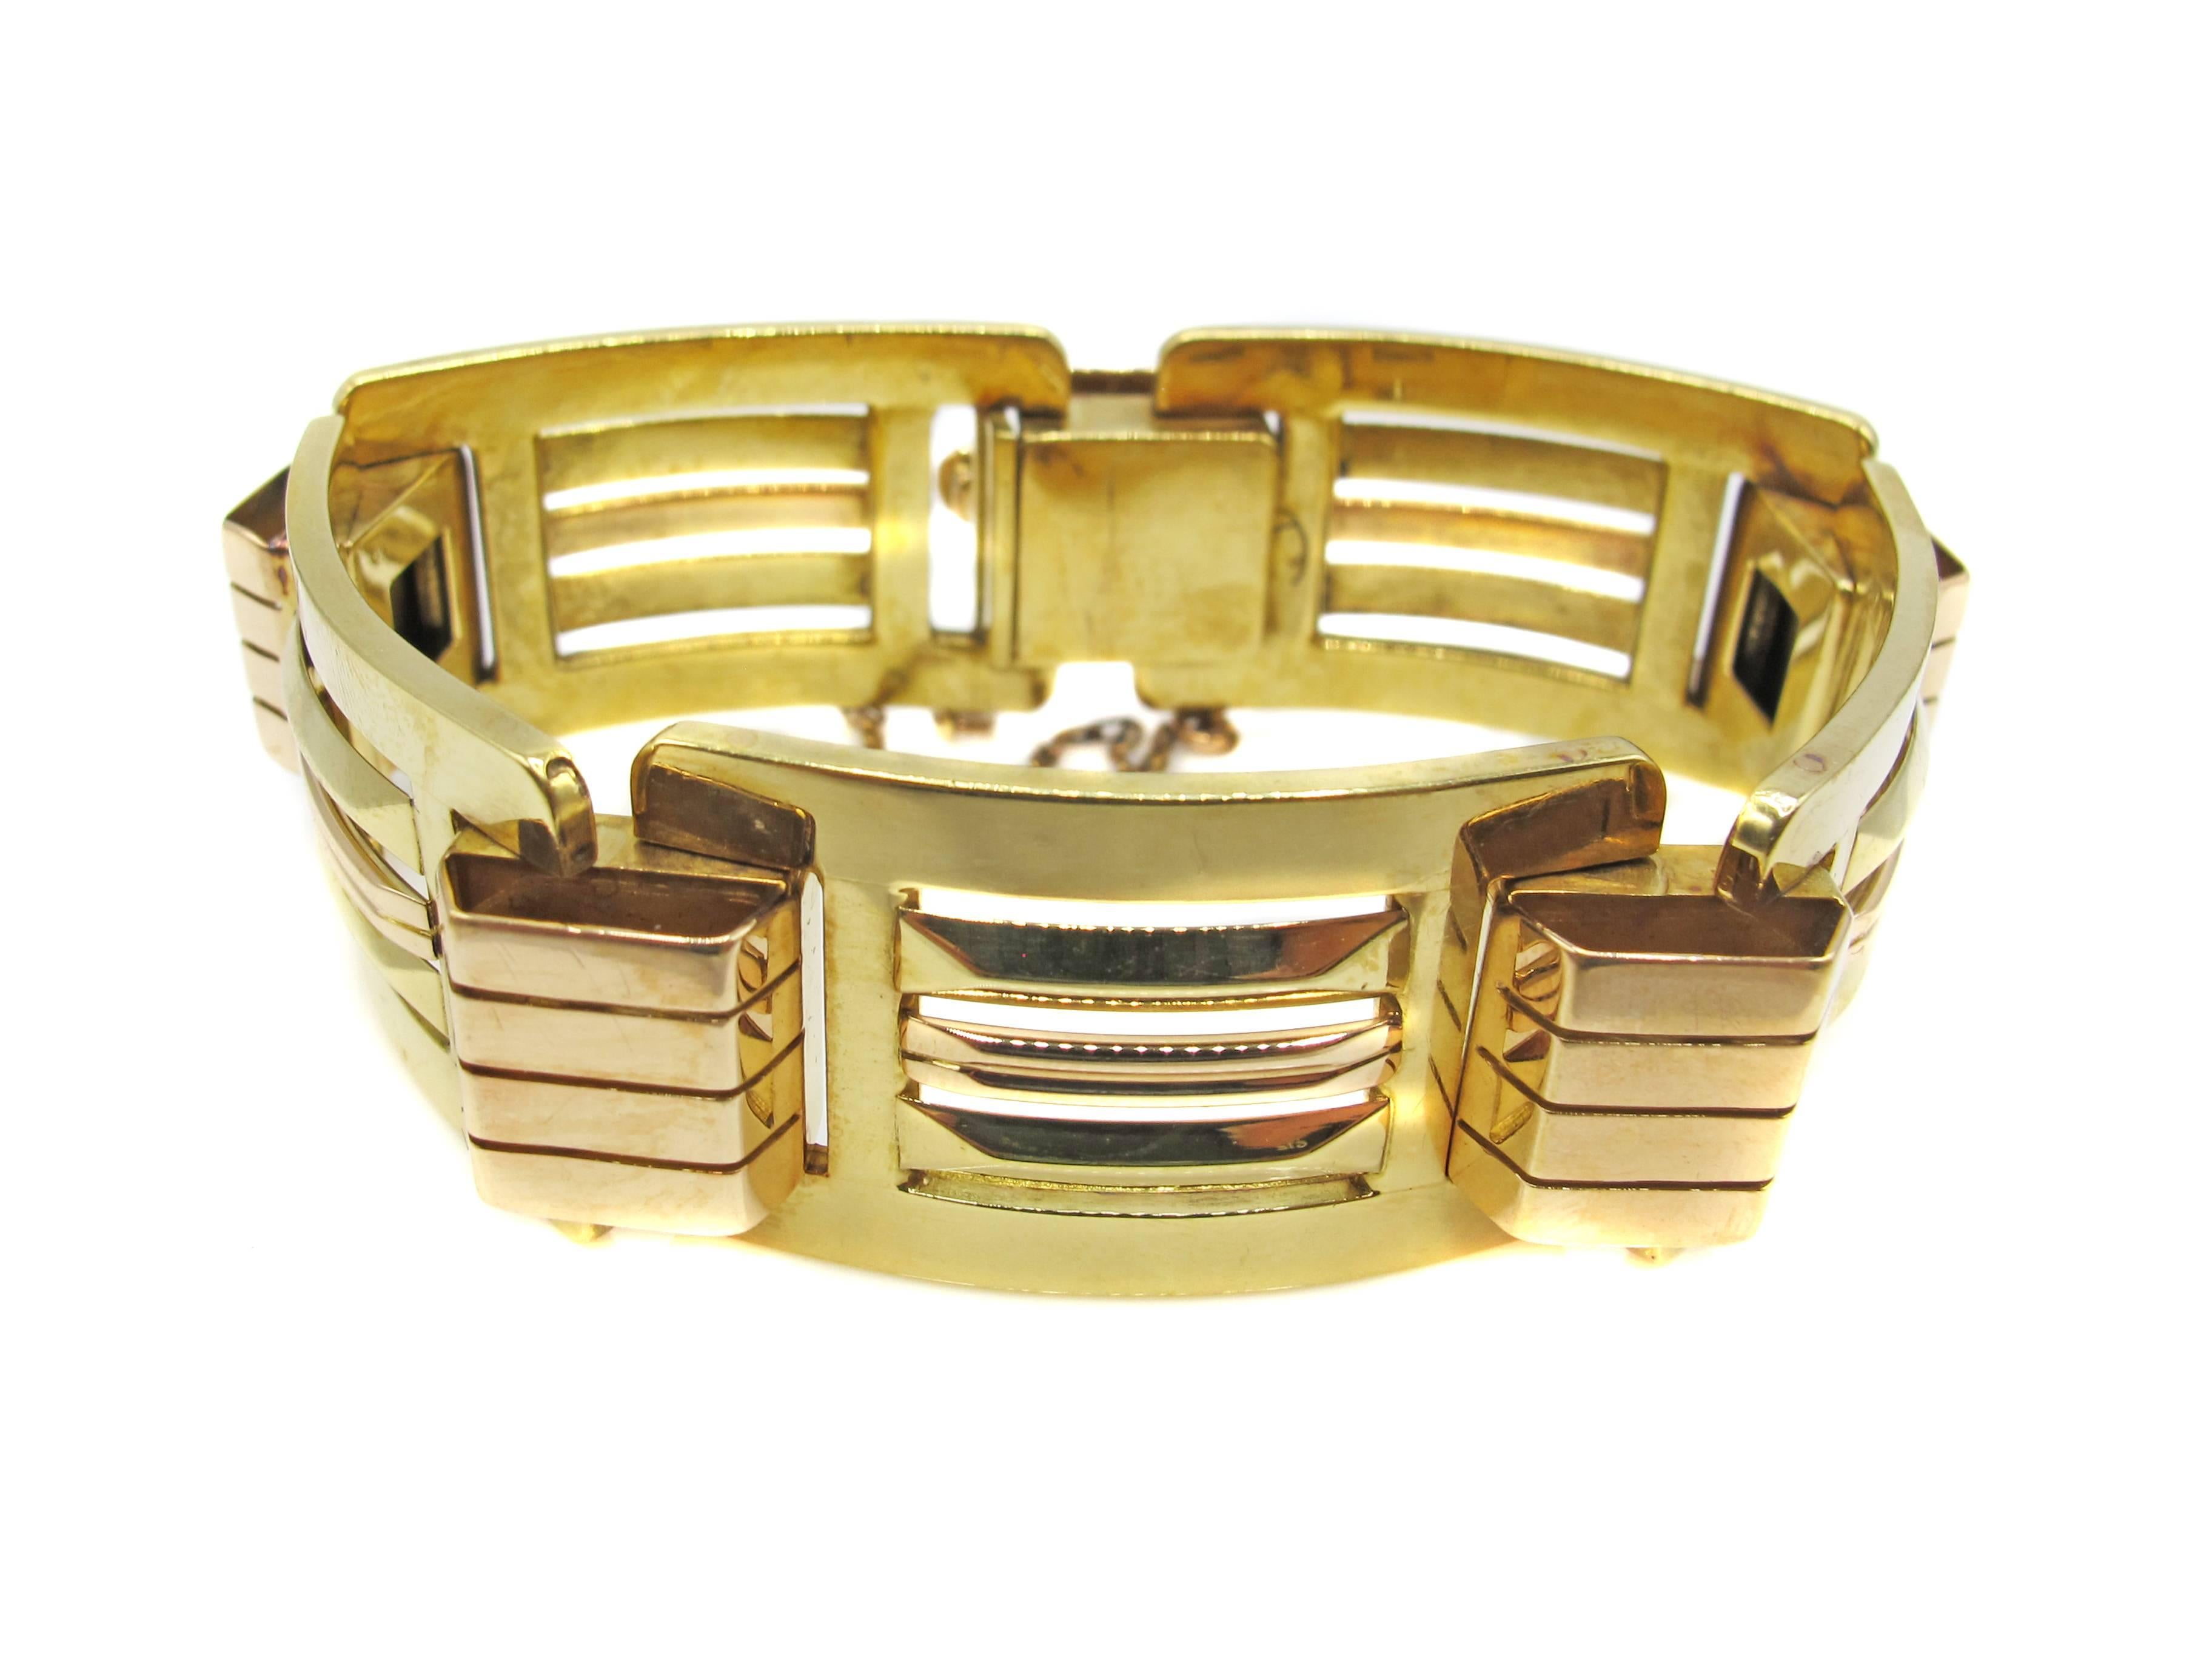 Interesting 18 Karat Retro Machine Age bracelet ca. 1945 designed with 5 yellow gold rectangular elements alternating with 5 raised rose gold tank track elements. The contrast of color and variation of width give this period piece a great three